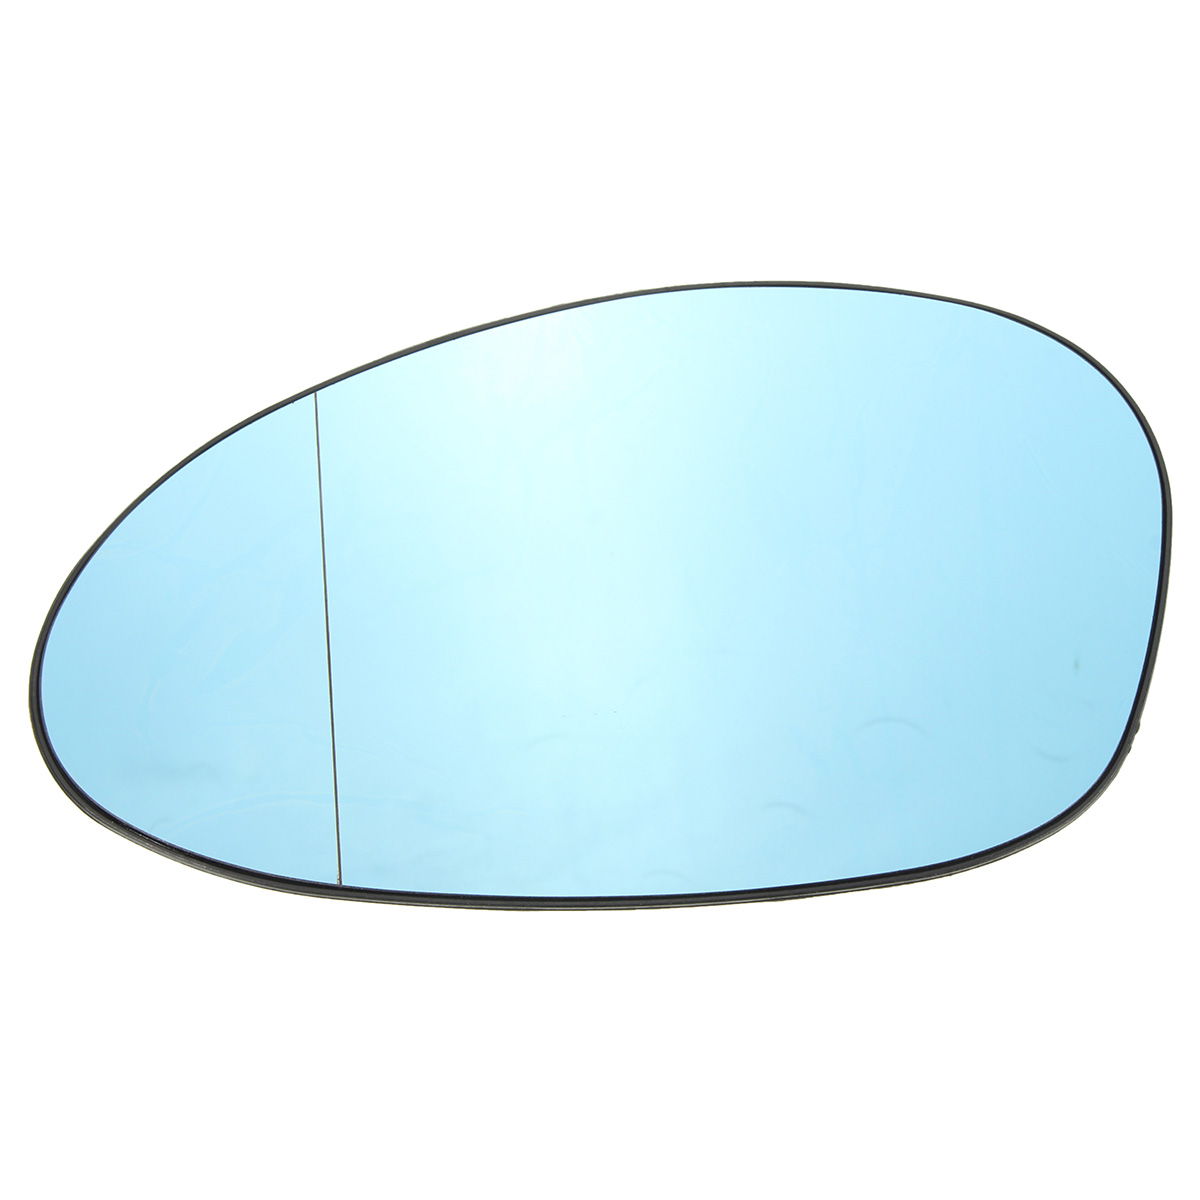 Blue-Tinted-Electric-Left-Wing-Mirror-Glass-For-BMW-M3-E46-Coupe-2001-06-1108913